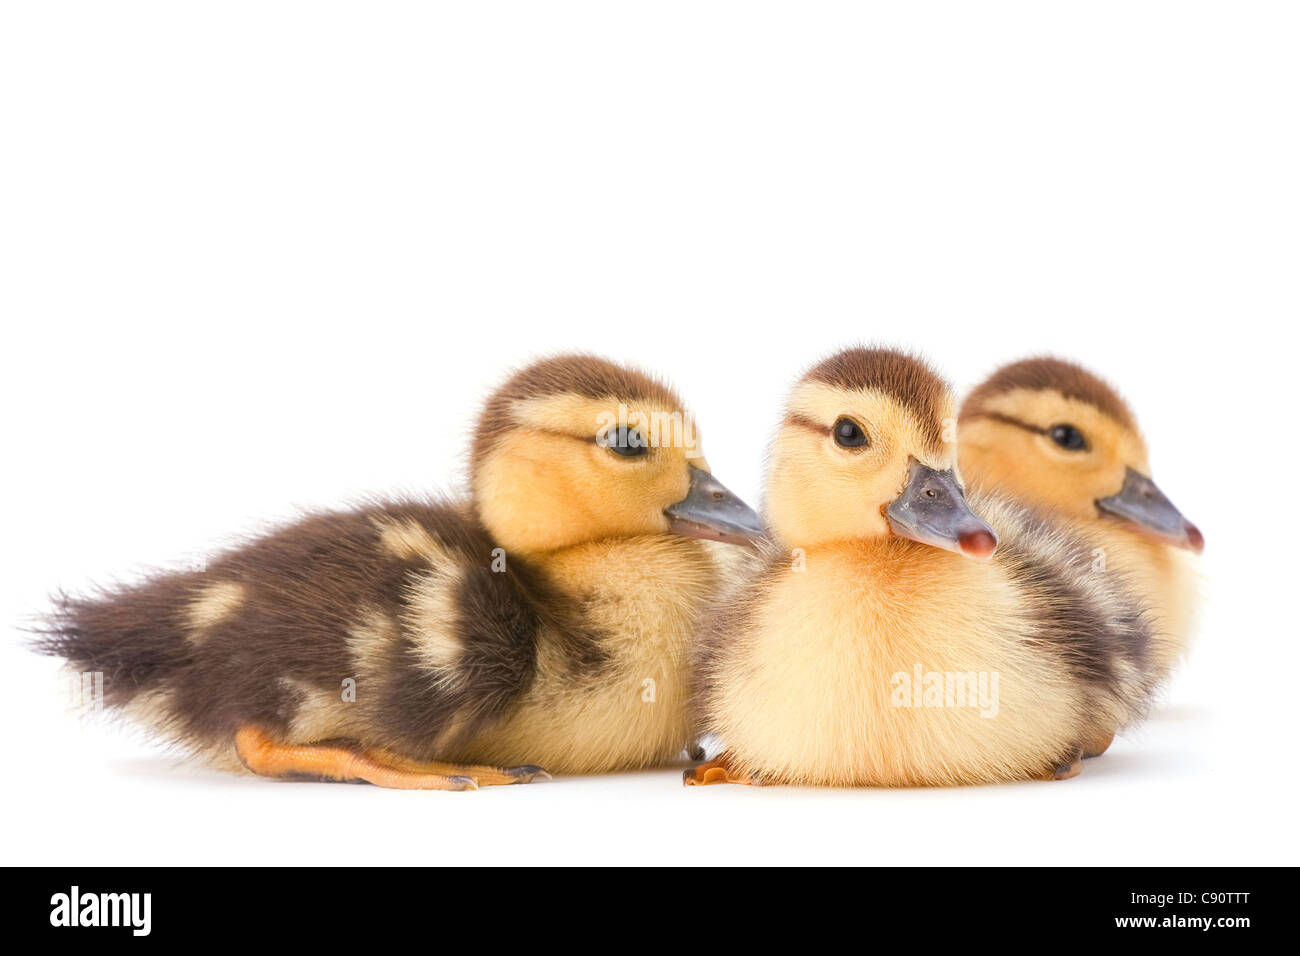 Brown duckling closeup on white background Stock Photo